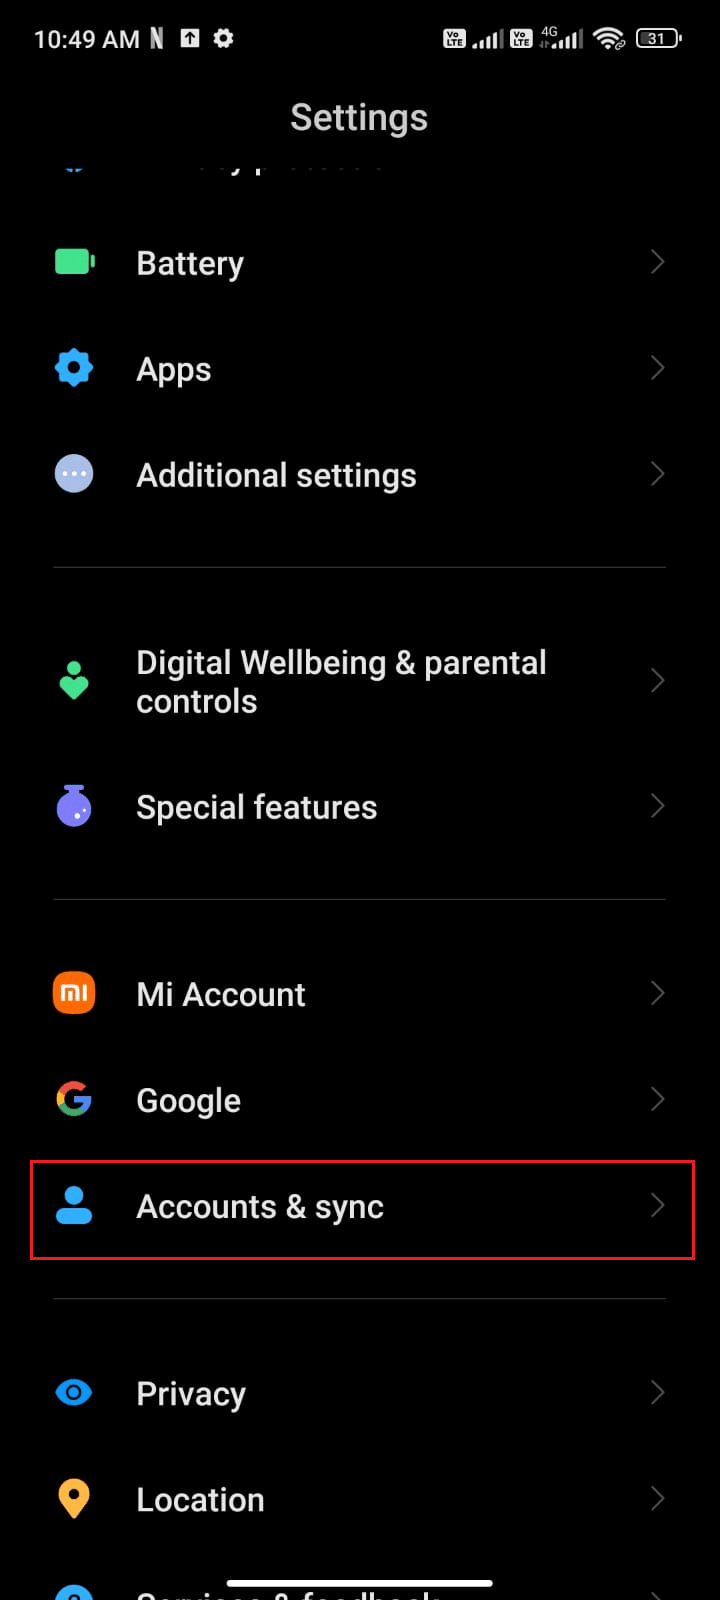 Scroll down the Settings screen and tap Accounts and sync. Fix WhatsApp Stopped Working Today on Android